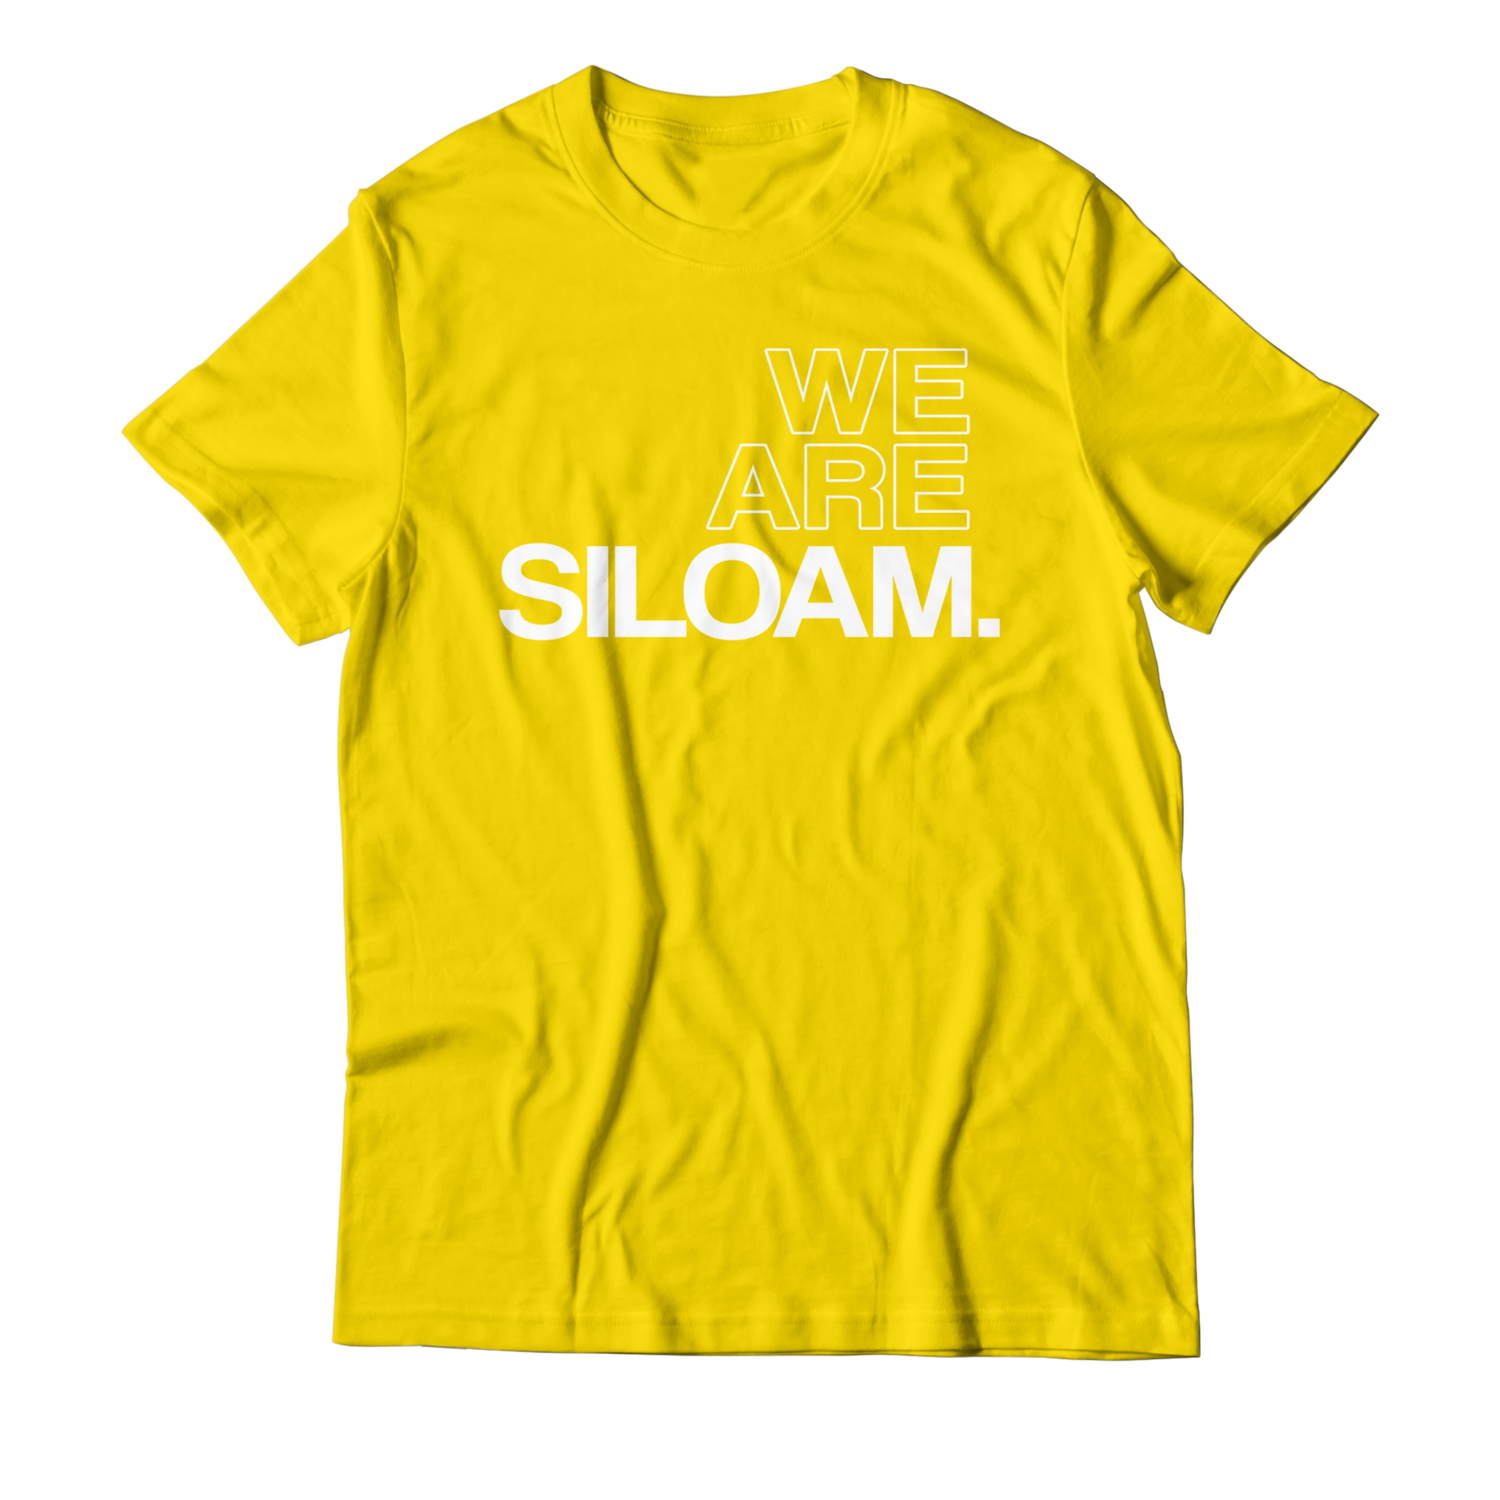 We Are Siloam T-shirt - Gold & White